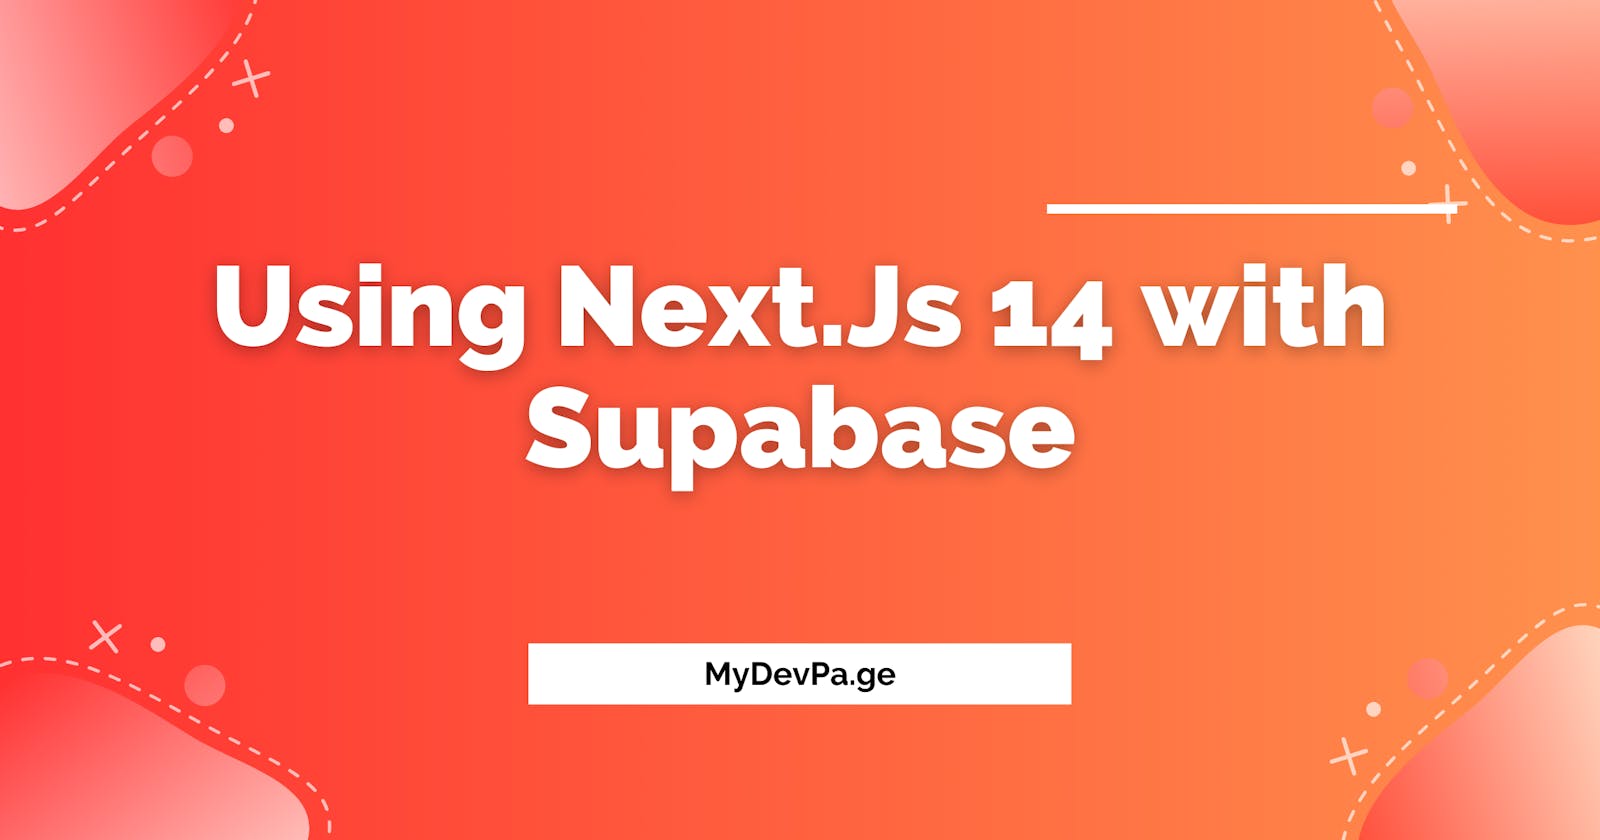 How to use Next.Js 14 with Supabase